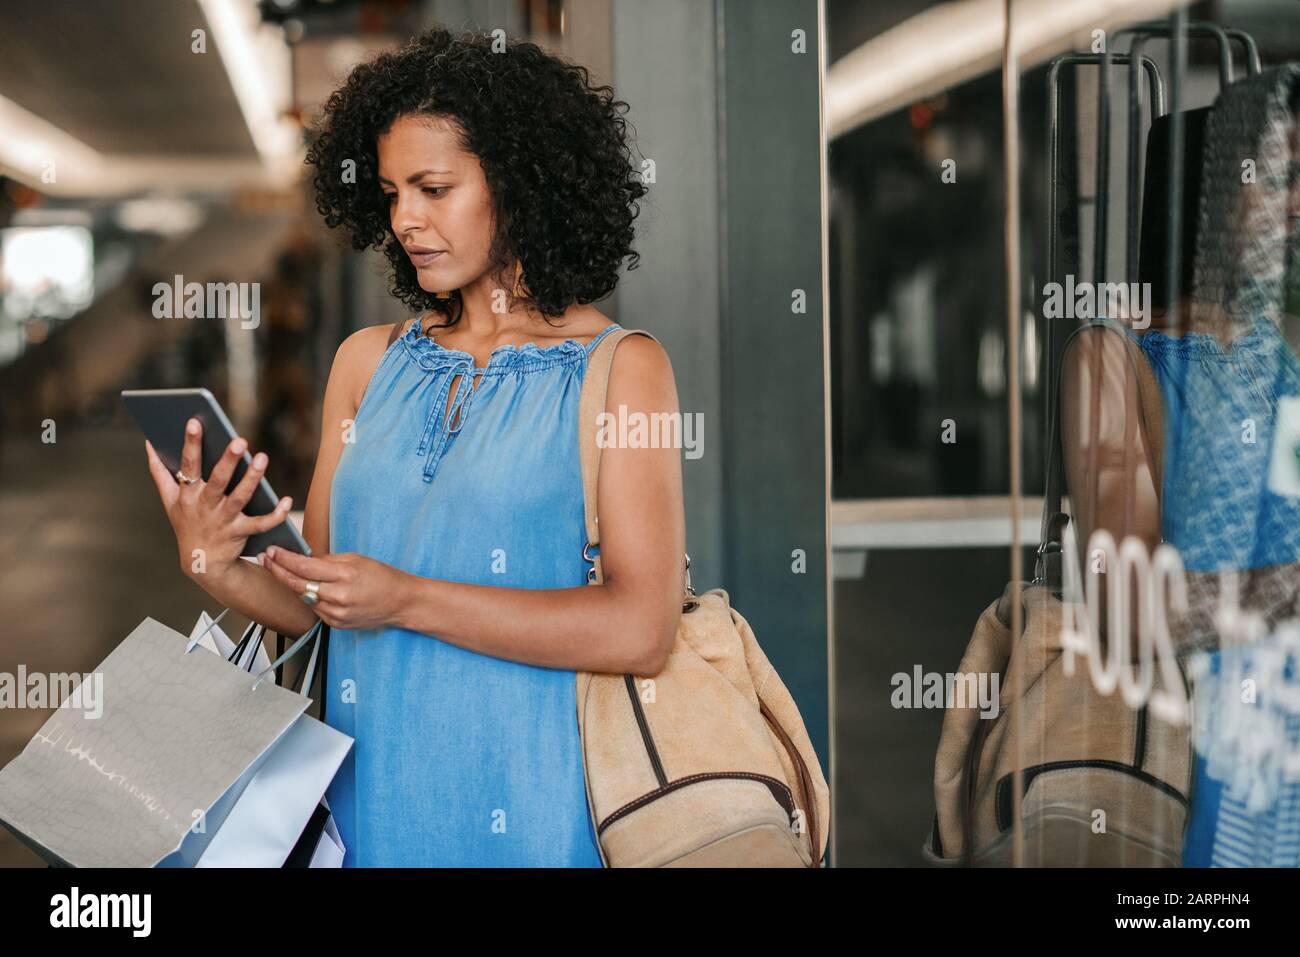 Young woman using a digital tablet while out clothes shopping Stock Photo